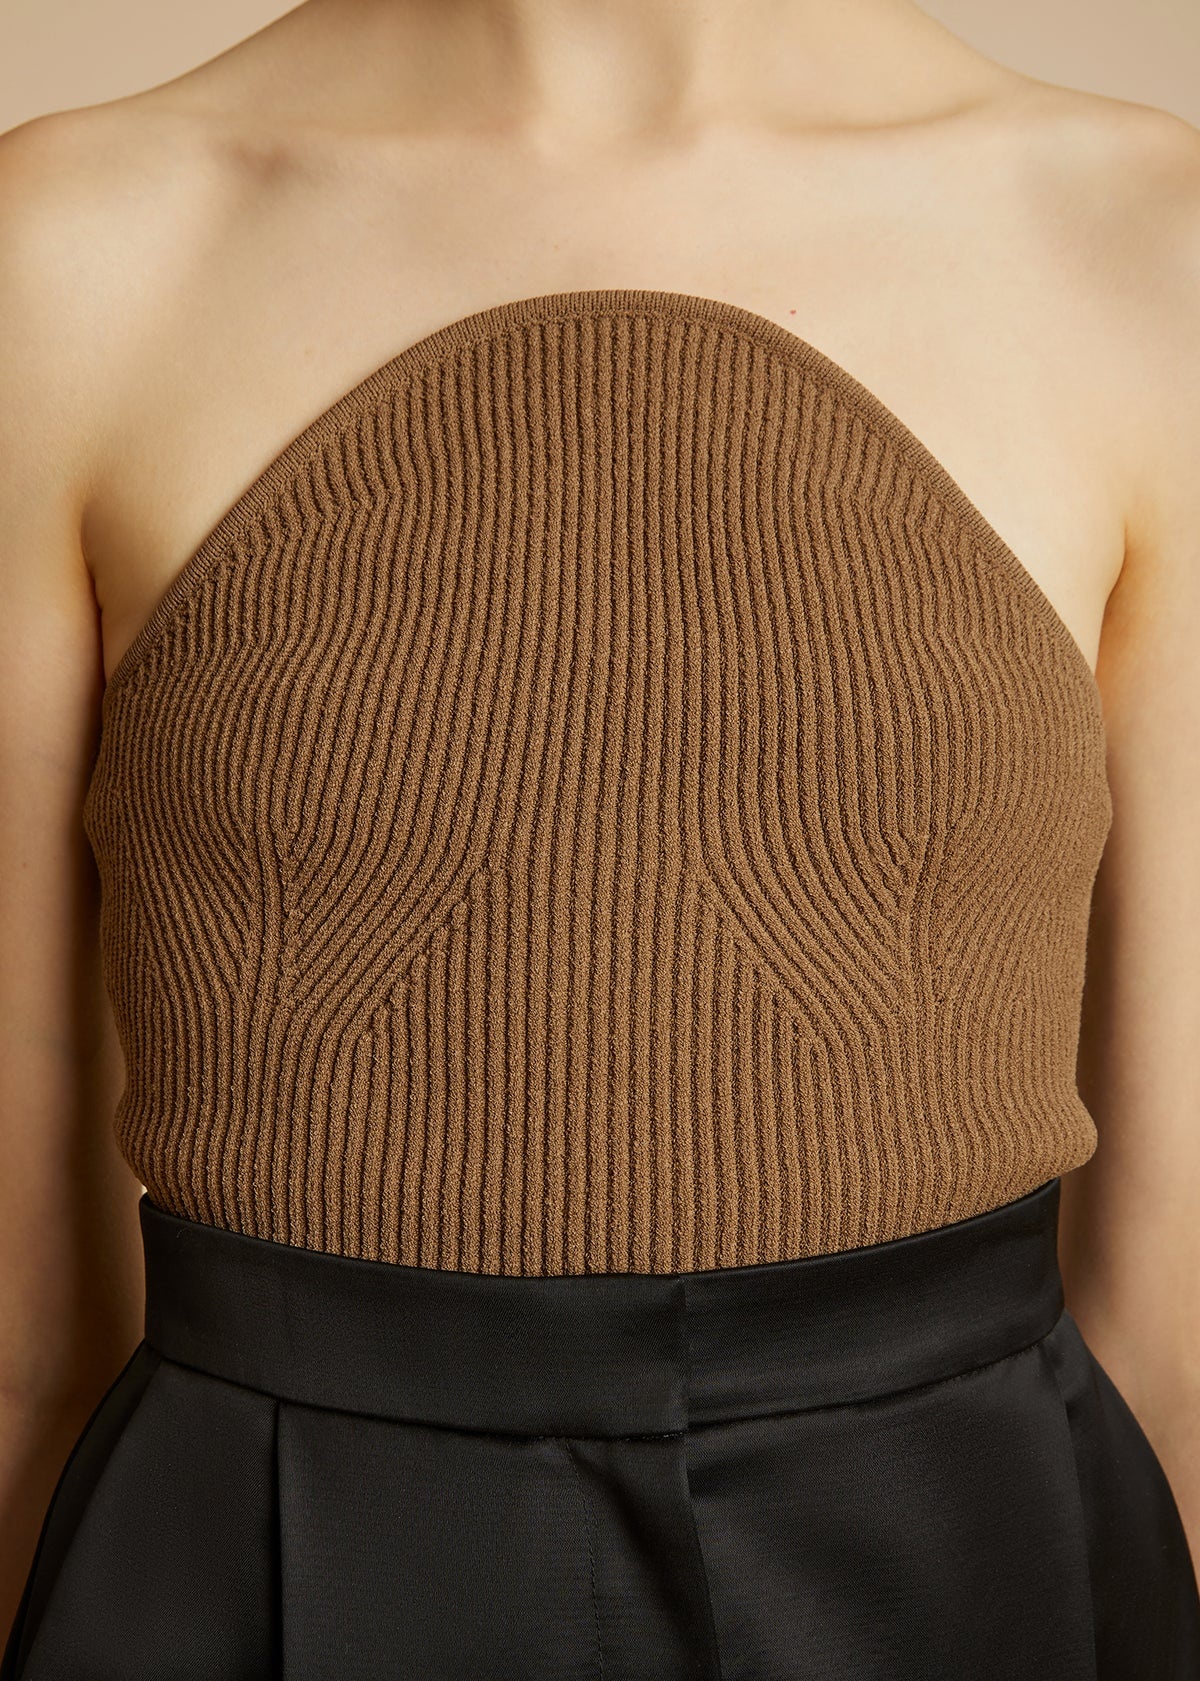 The Jericho Top in Carob - 5